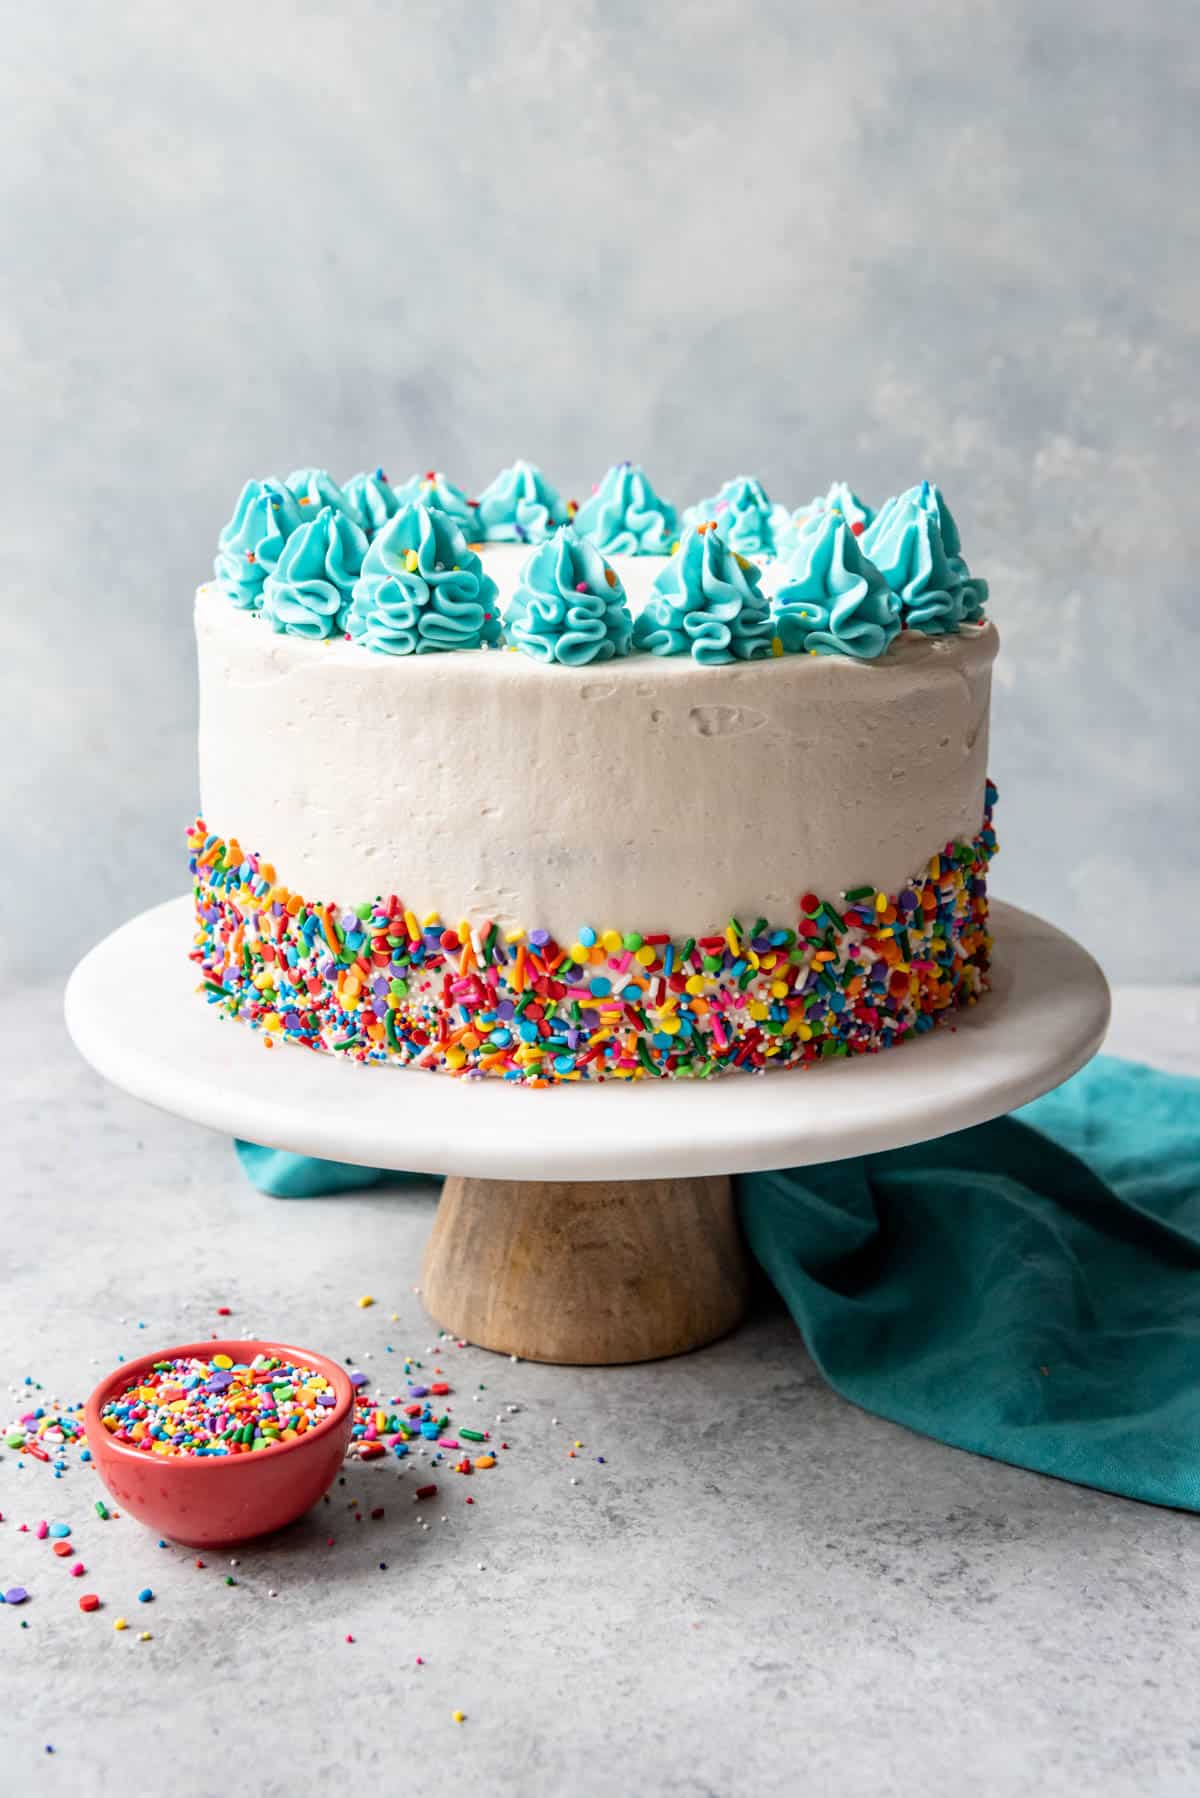 A frosted and decorated funfetti cake.